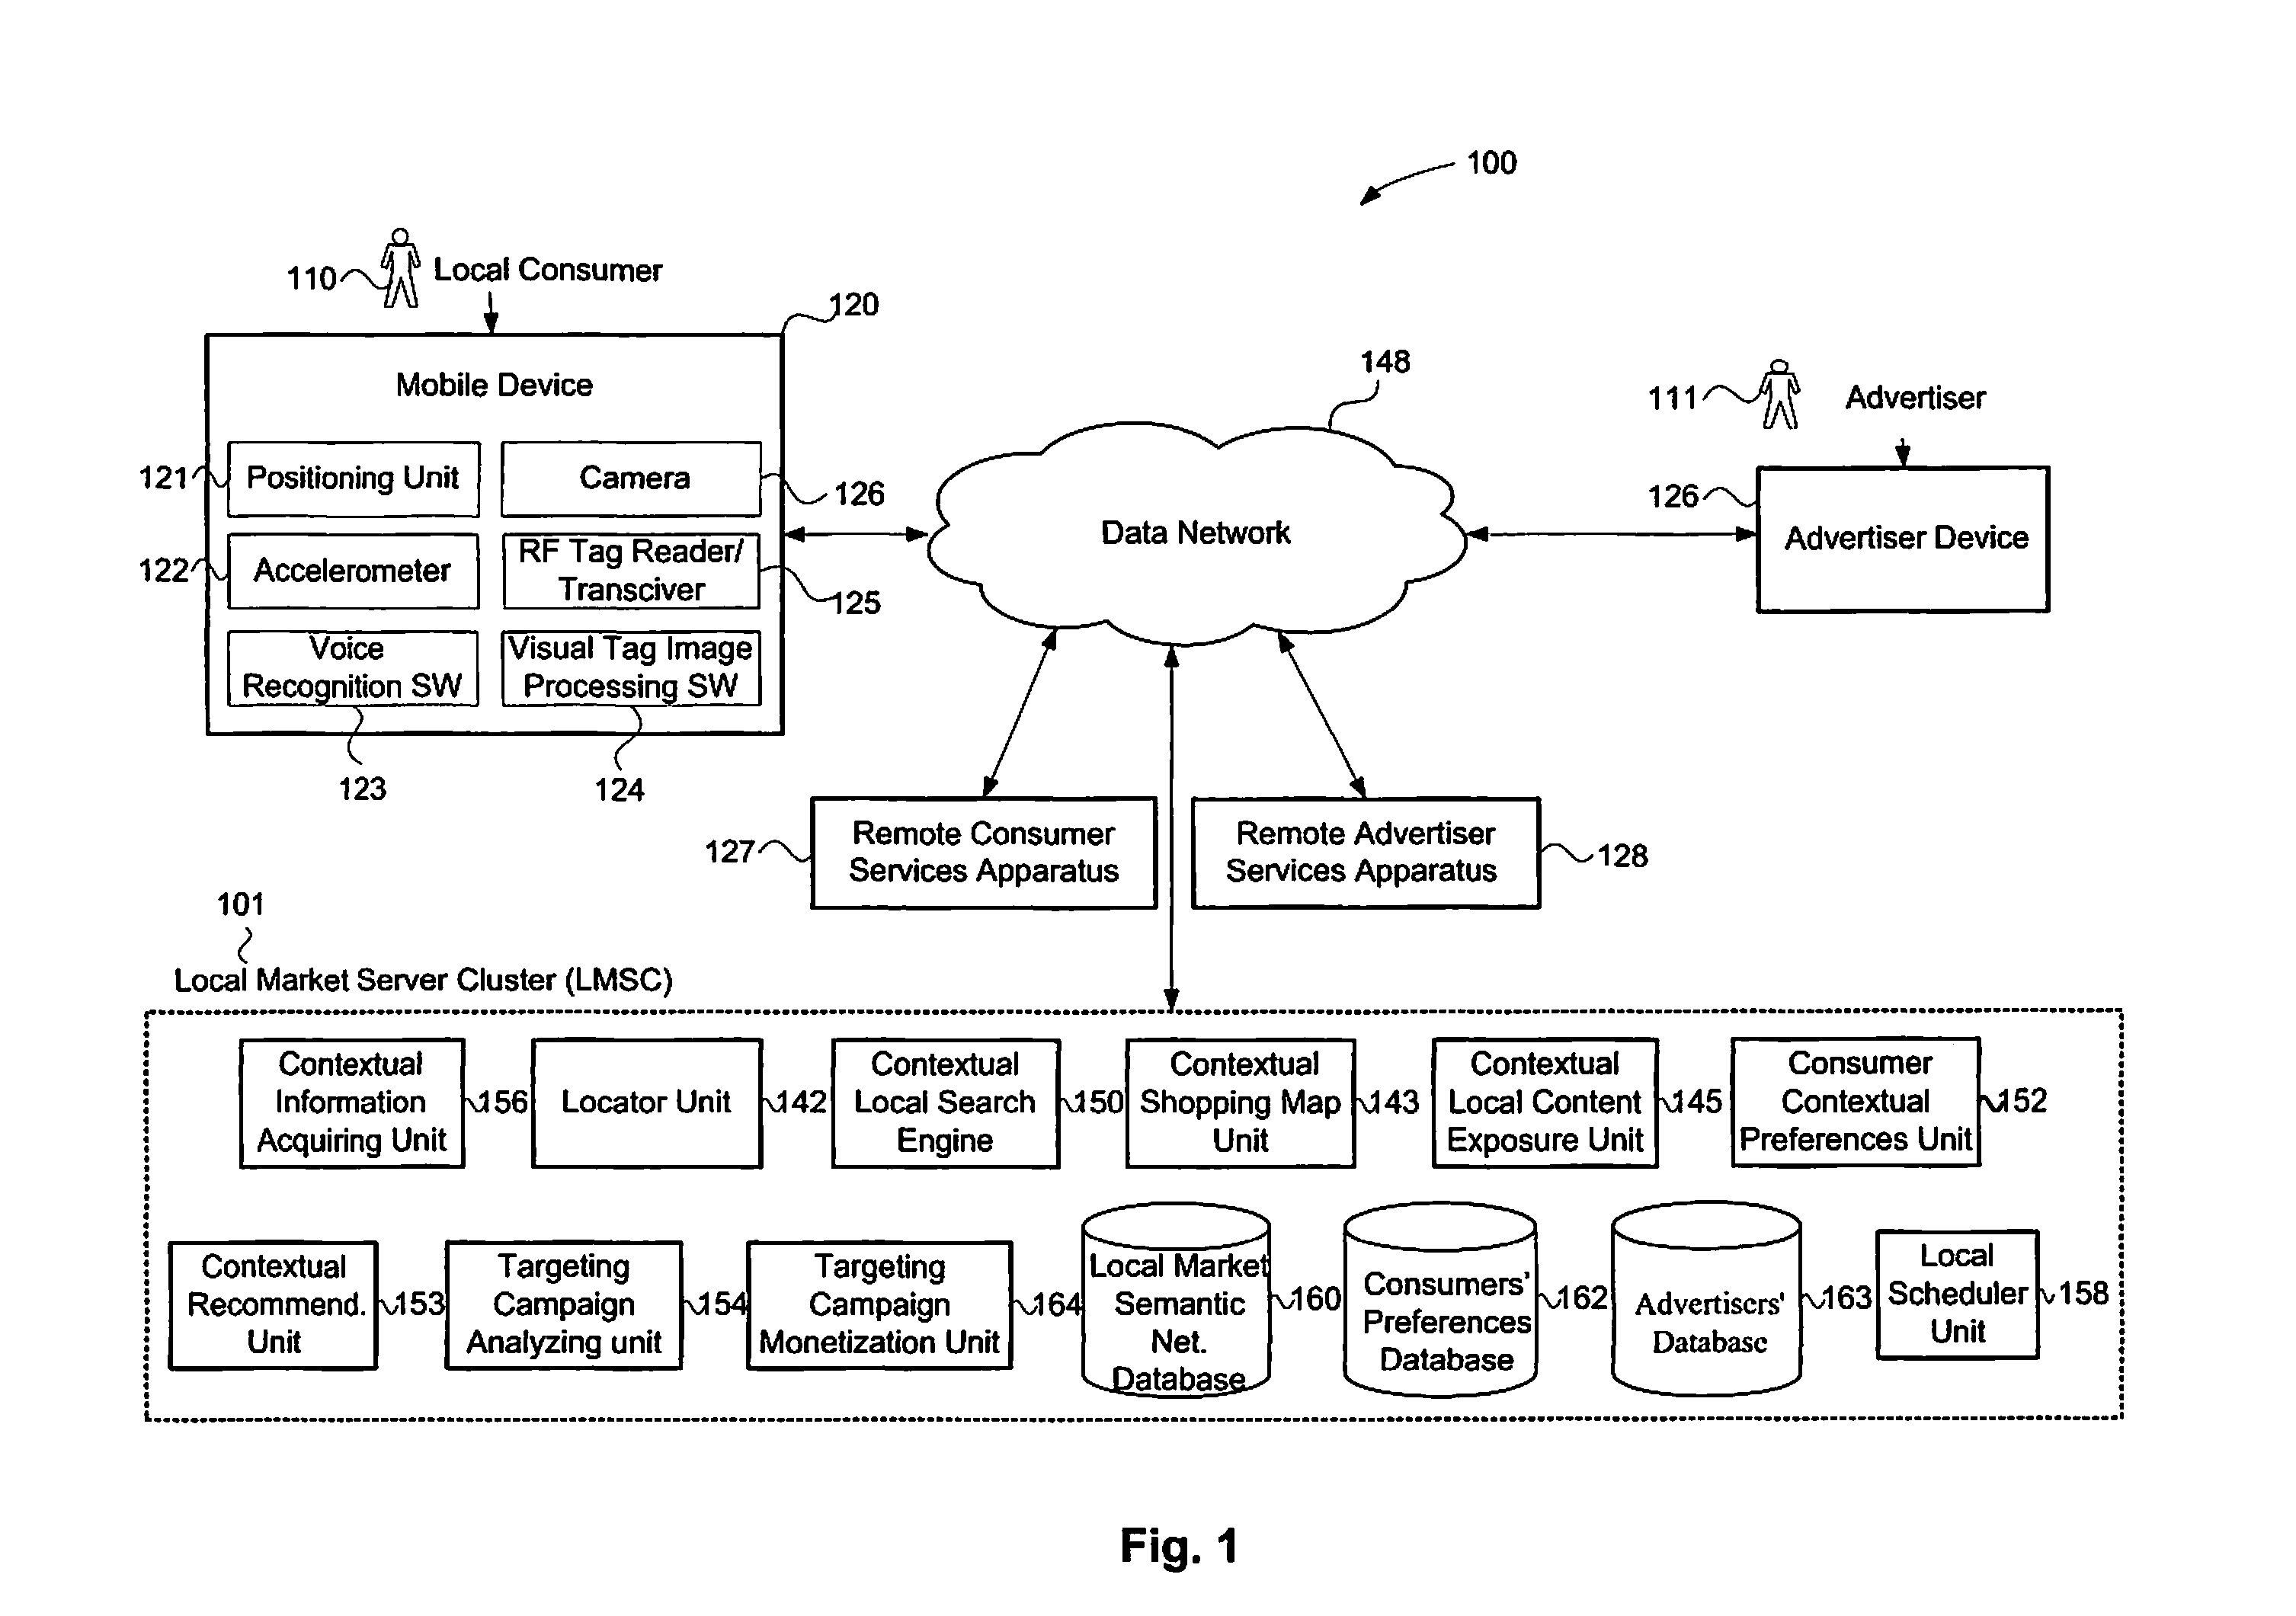 Methods and System for Providing Local Targeted Information to Mobile Devices of Consumers